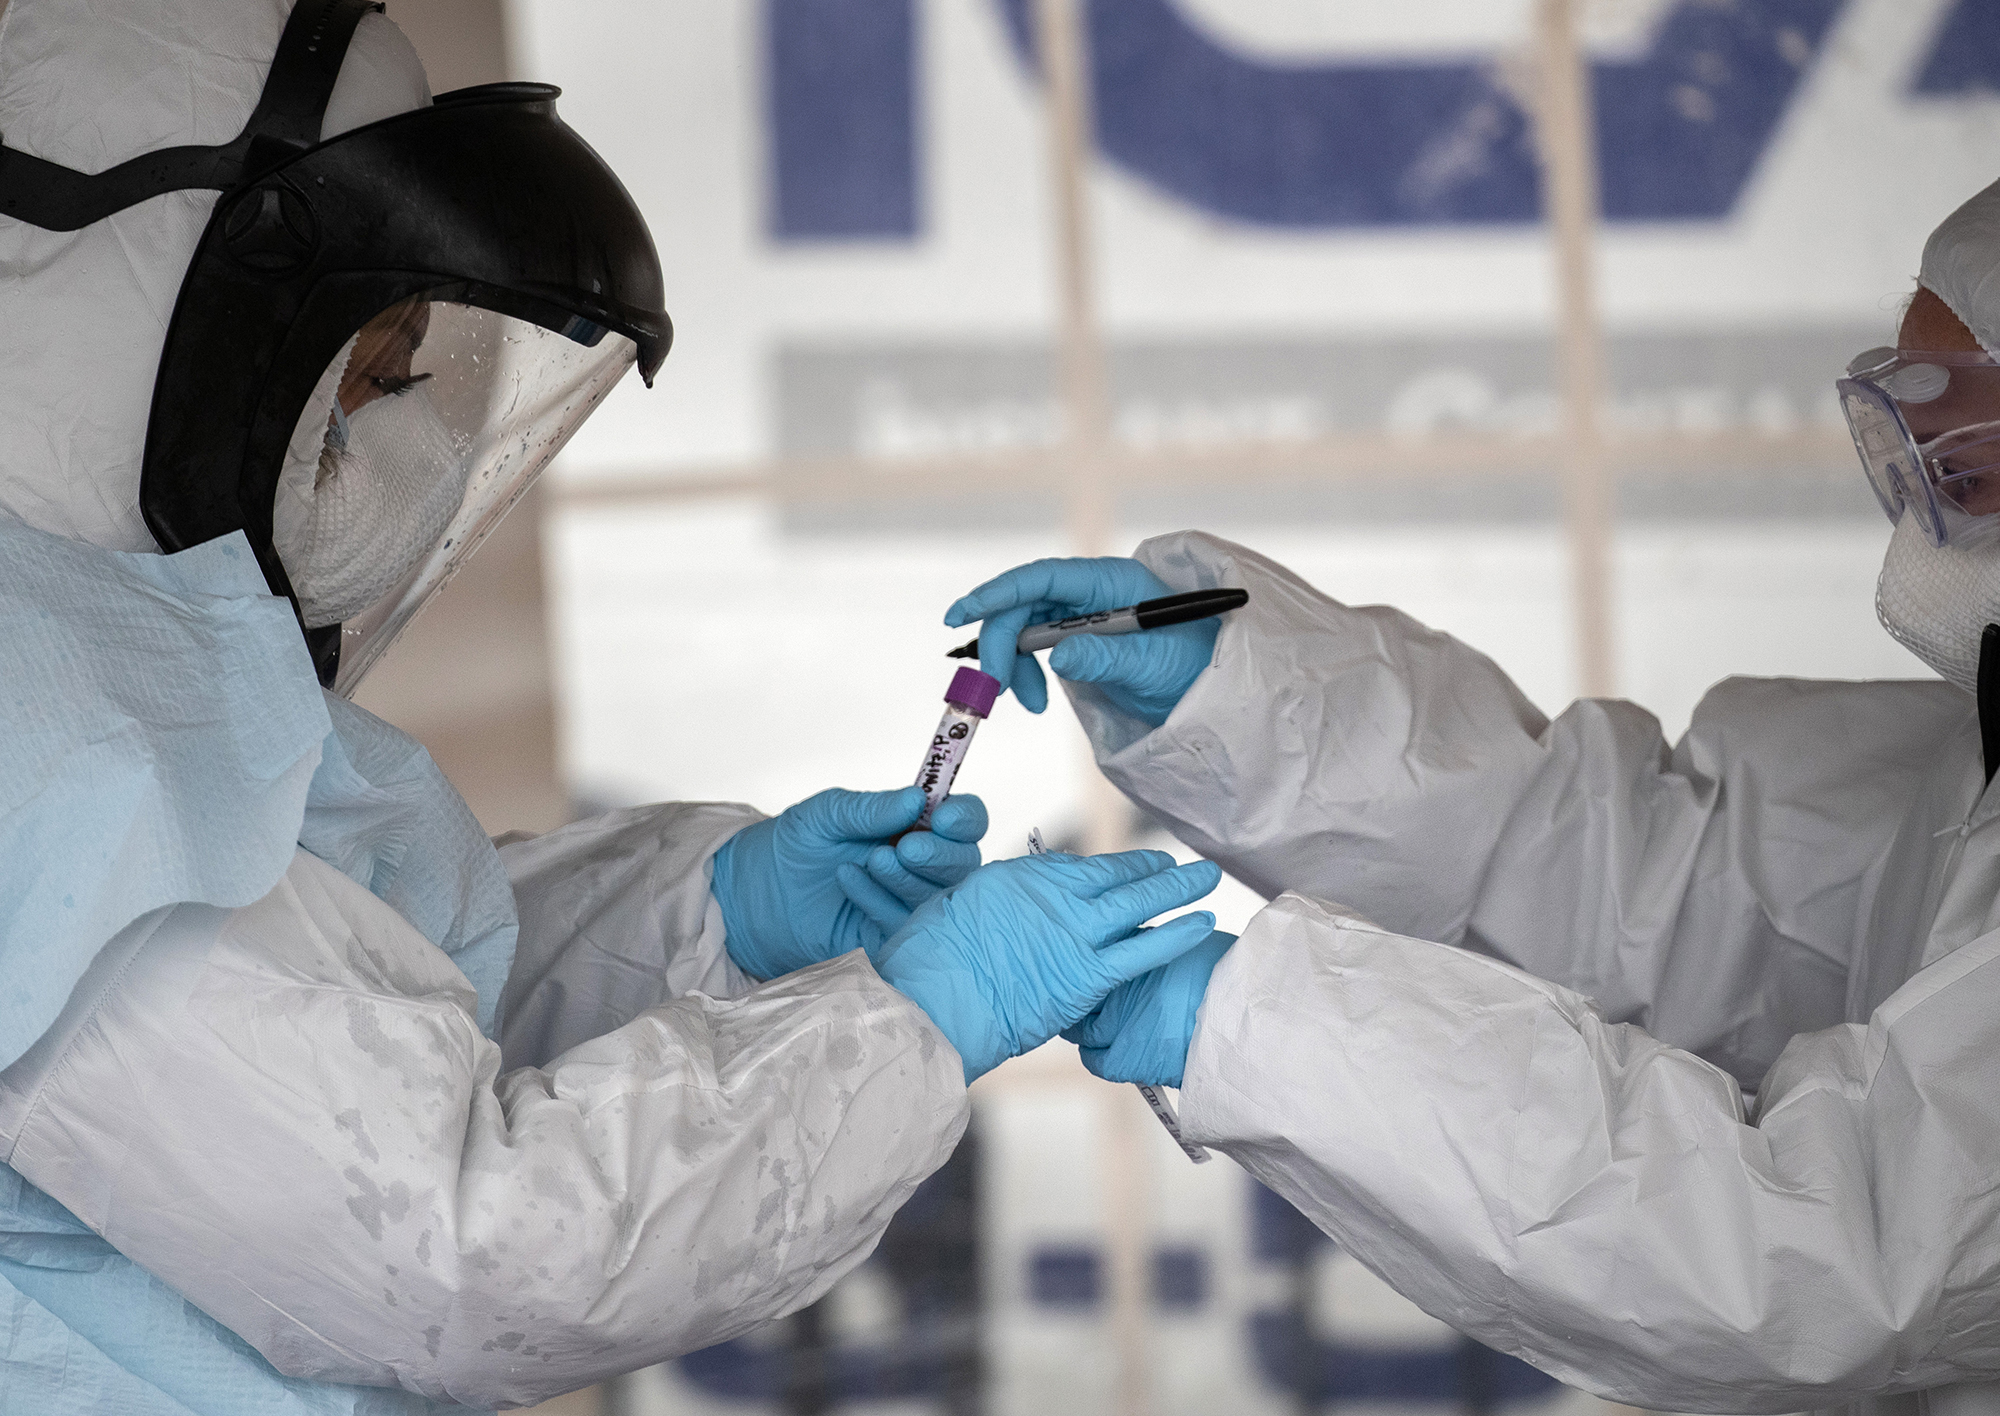 Health workers dressed in personal protective equipment handle a coronavirus test at a drive-thru testing station at Cummings Park on March 23, in Stamford, Connecticut.